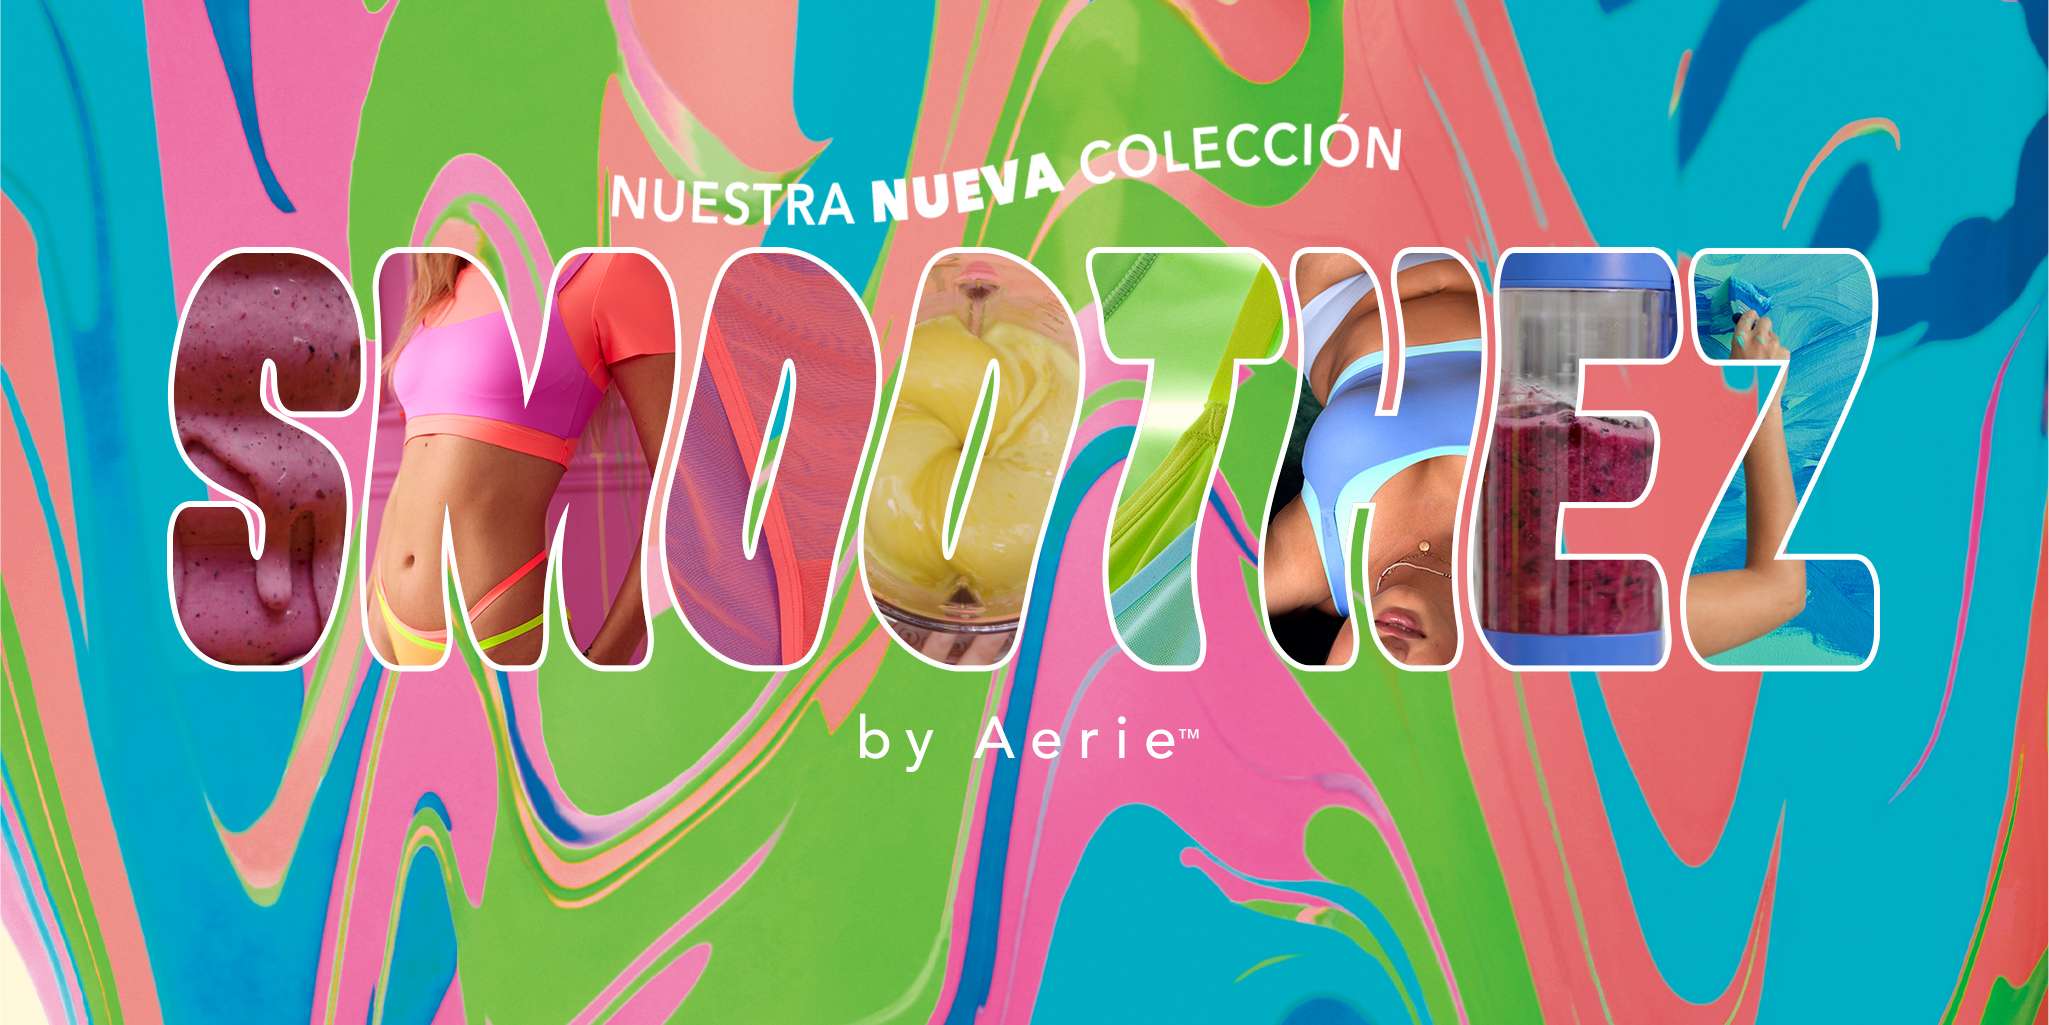 paint swirl background with text "nuestra nueva colleccion SMOOTHEZ by Aerie"